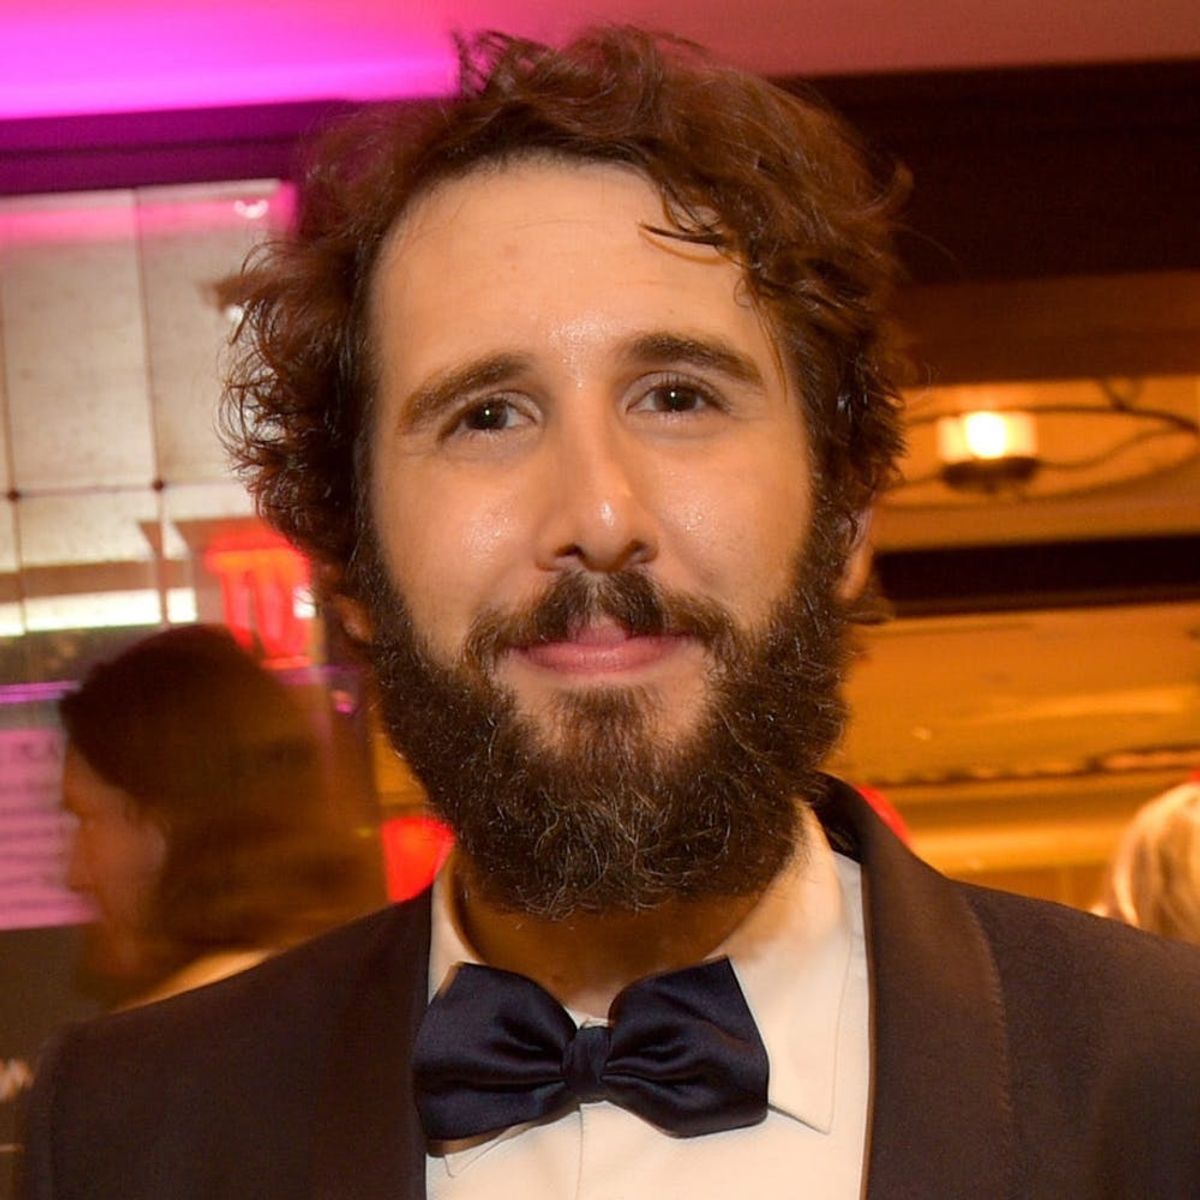 Josh Groban Shares His Harrowing Experience from the NYC Attack